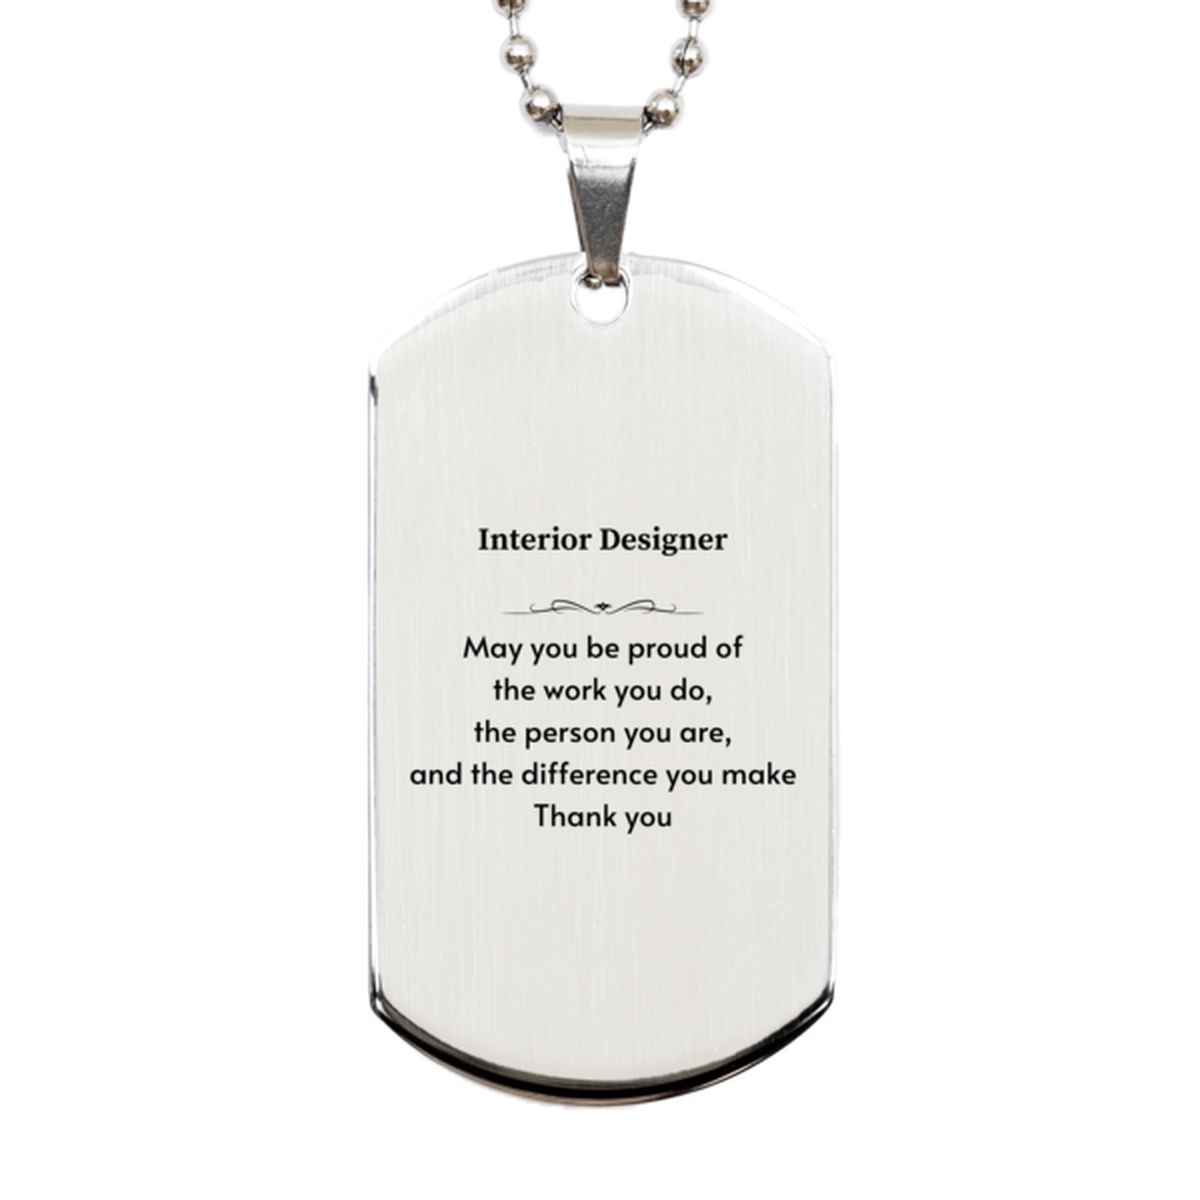 Heartwarming Silver Dog Tag Retirement Coworkers Gifts for Interior Designer, Interior Designer May You be proud of the work you do, the person you are Gifts for Boss Men Women Friends